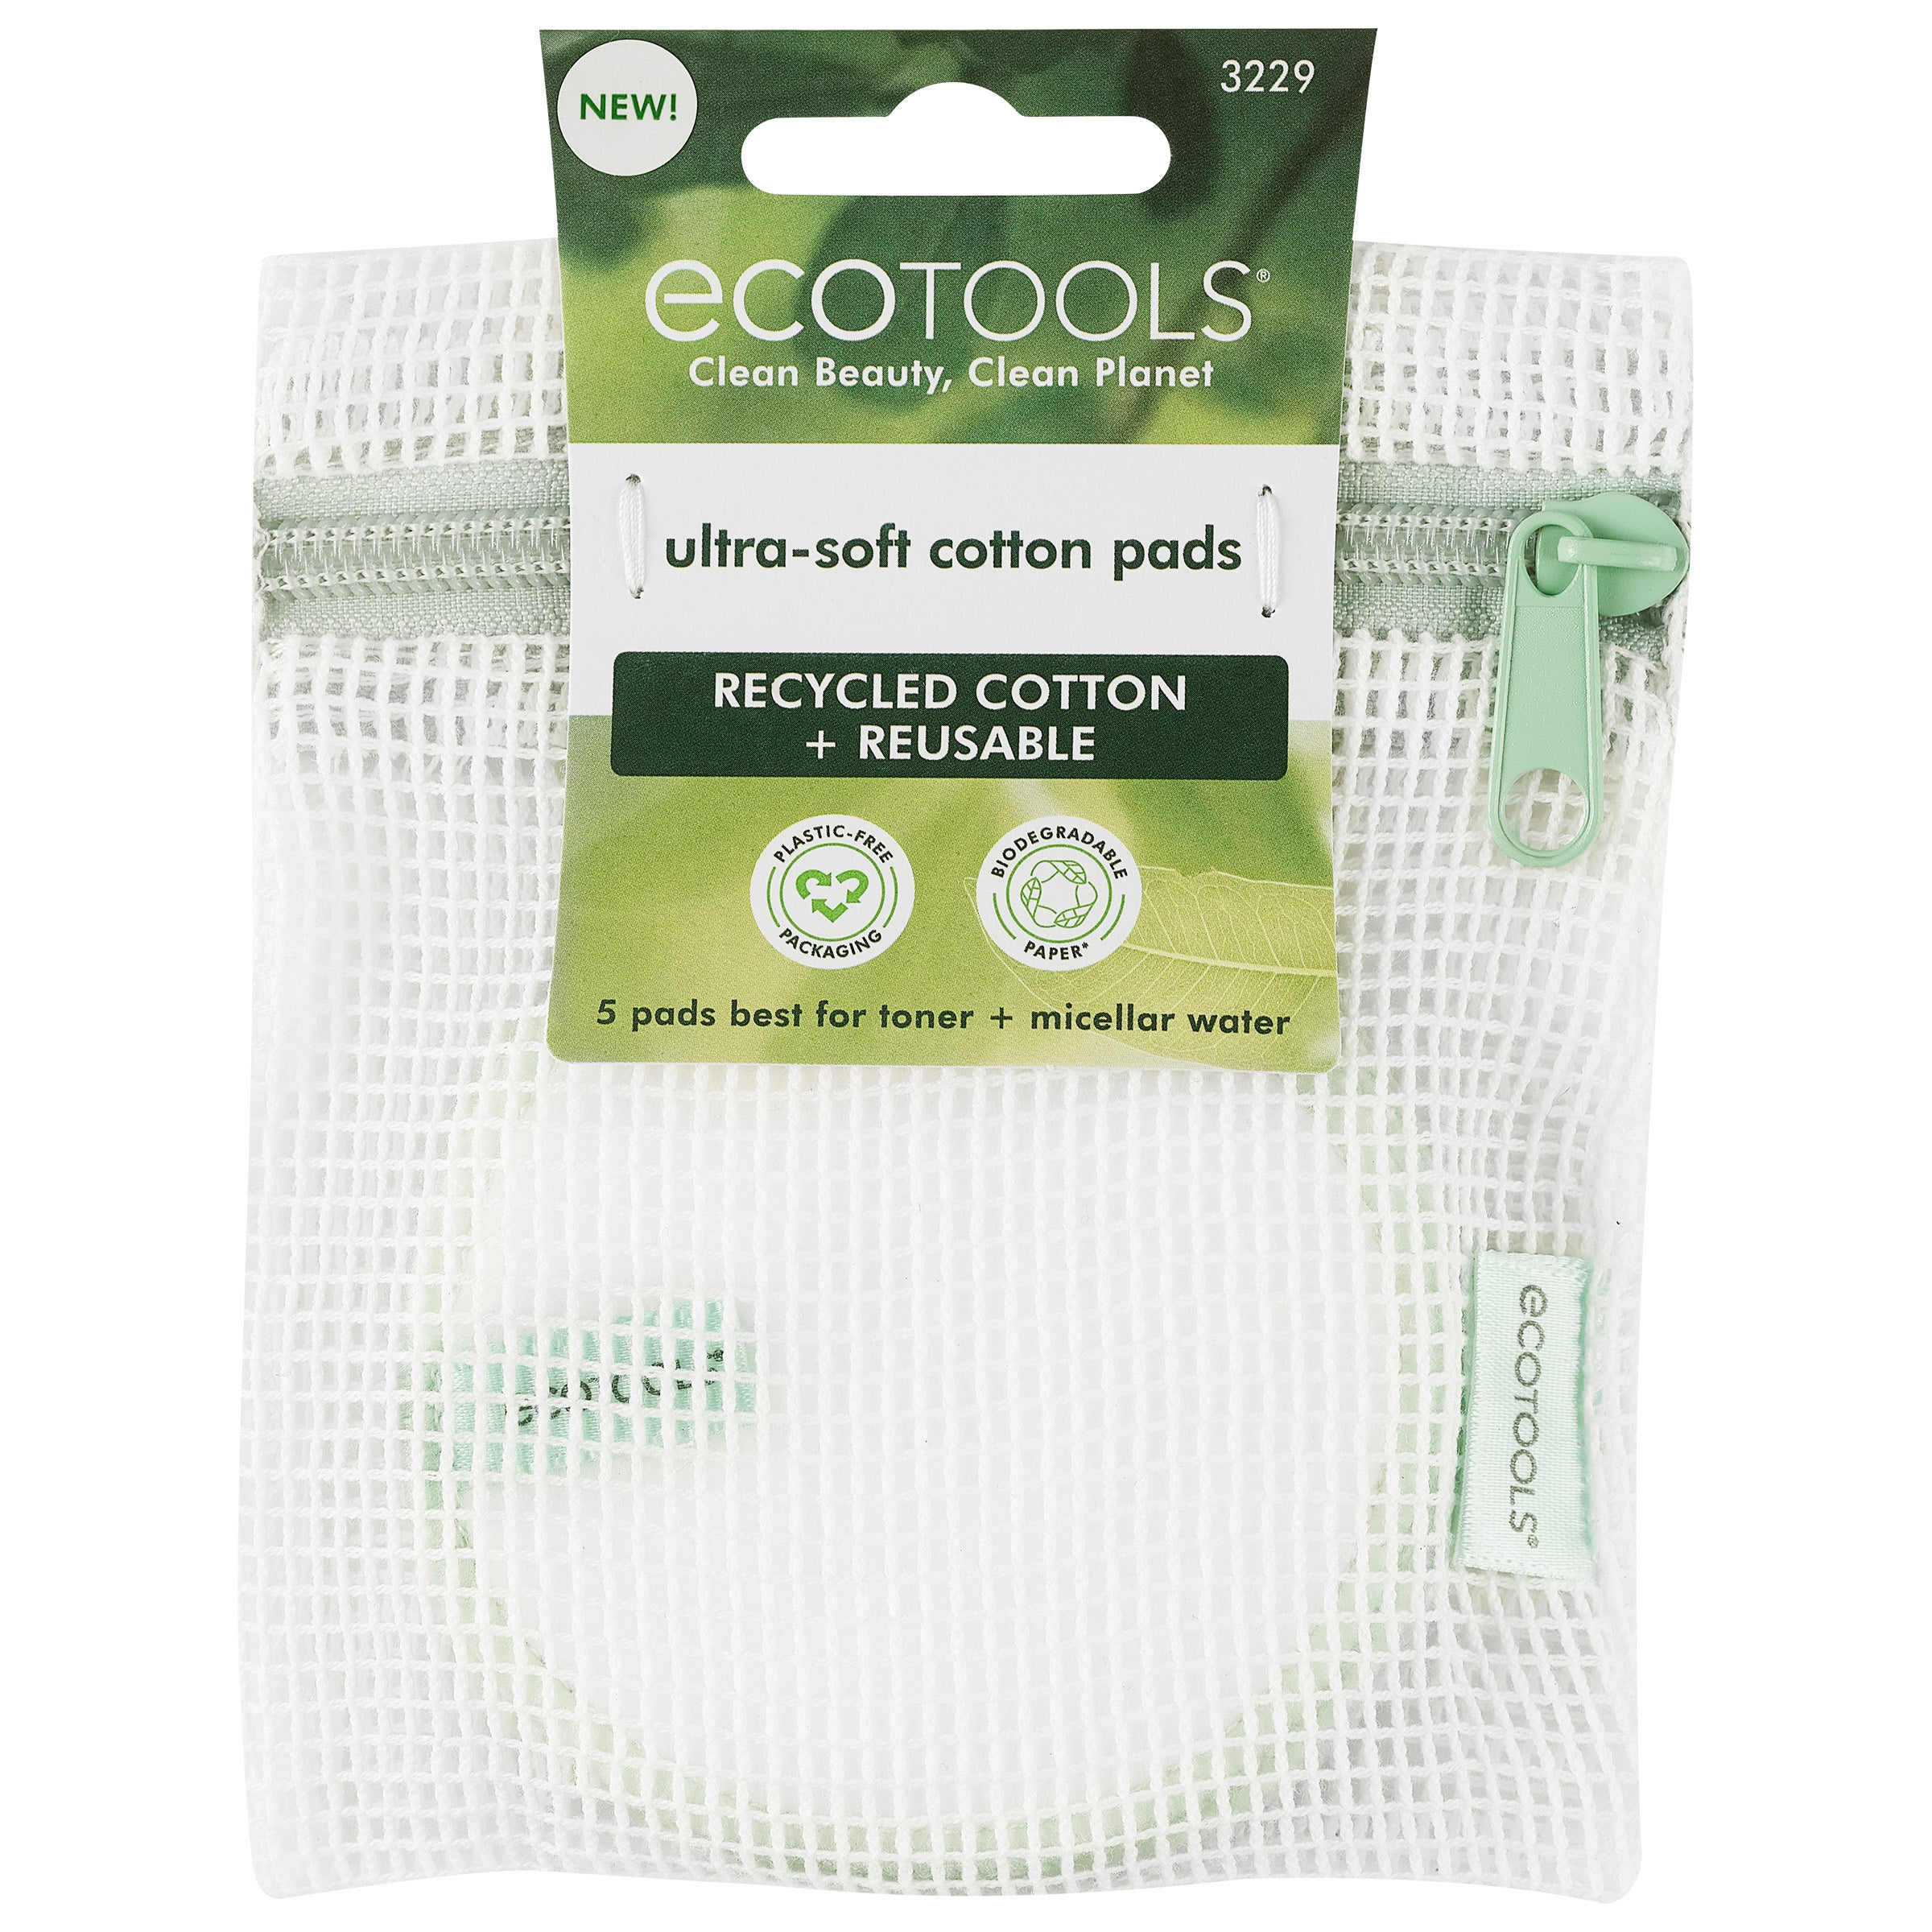 EcoTools Reusable Cotton Pads, Ultra Soft, Durable, Cleanses or Applies  Skincare, Sustainable Alternative, Washable with Laundry Bag, 6 Piece Set –  EcoTools Beauty